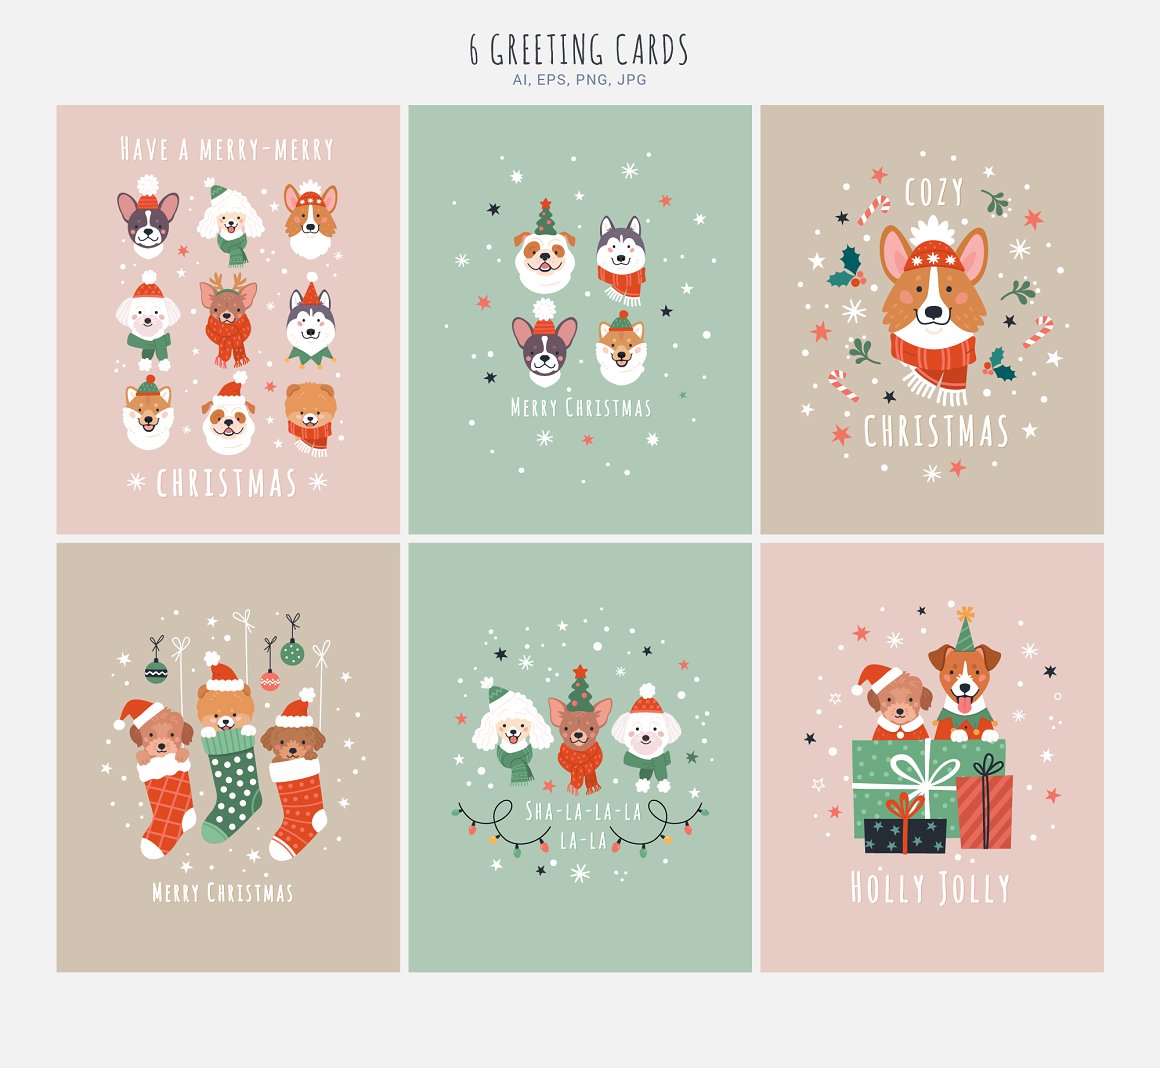 6 greeting cards with illustrations of xmas dogs.